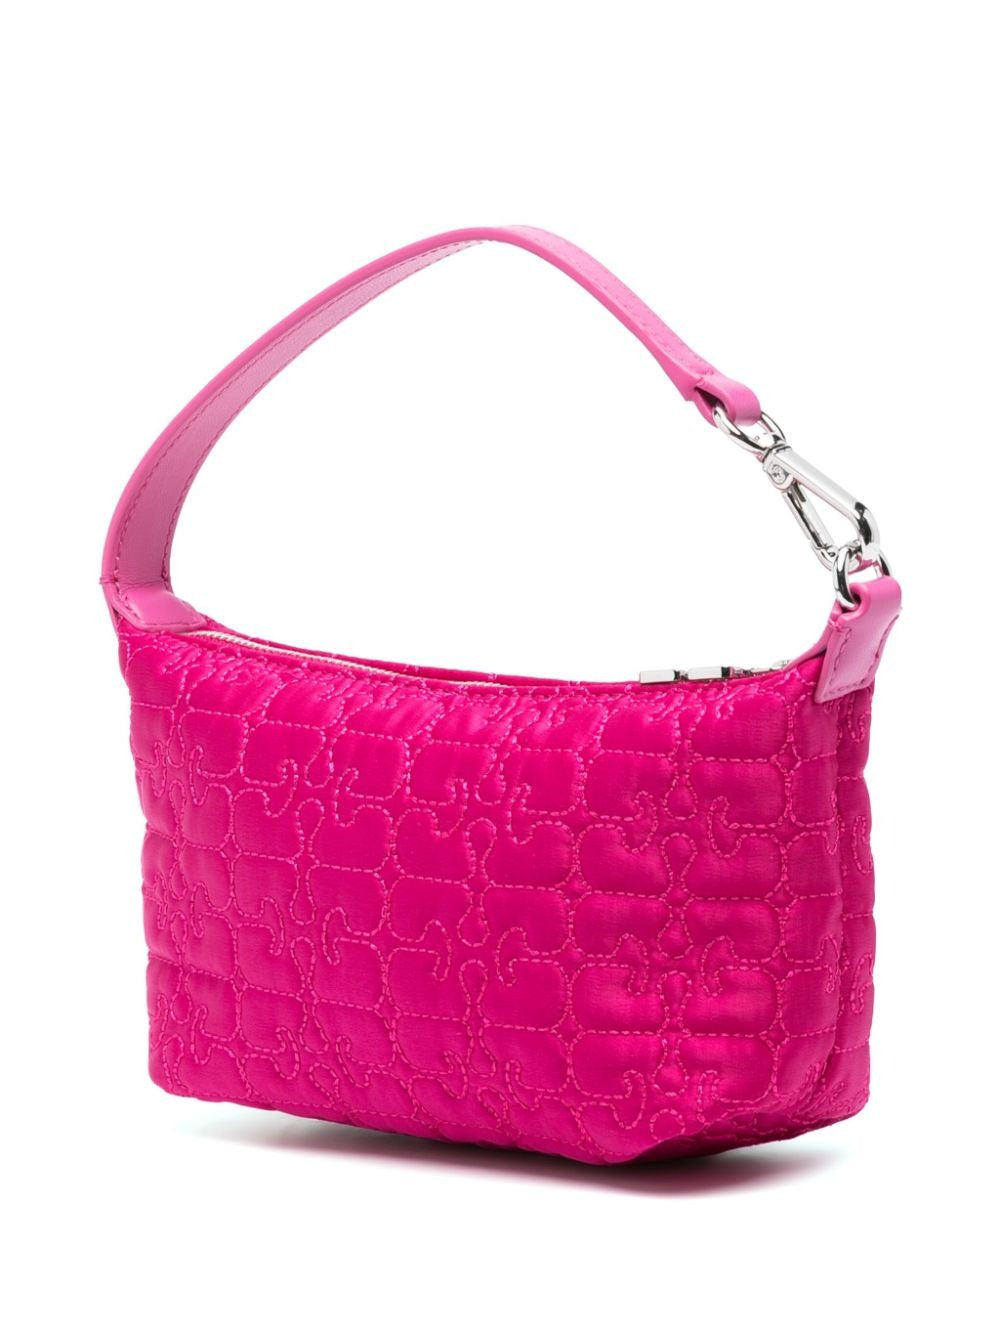 Ganni Butterfly Small Pouch Satin Handbag in Shocking Pink